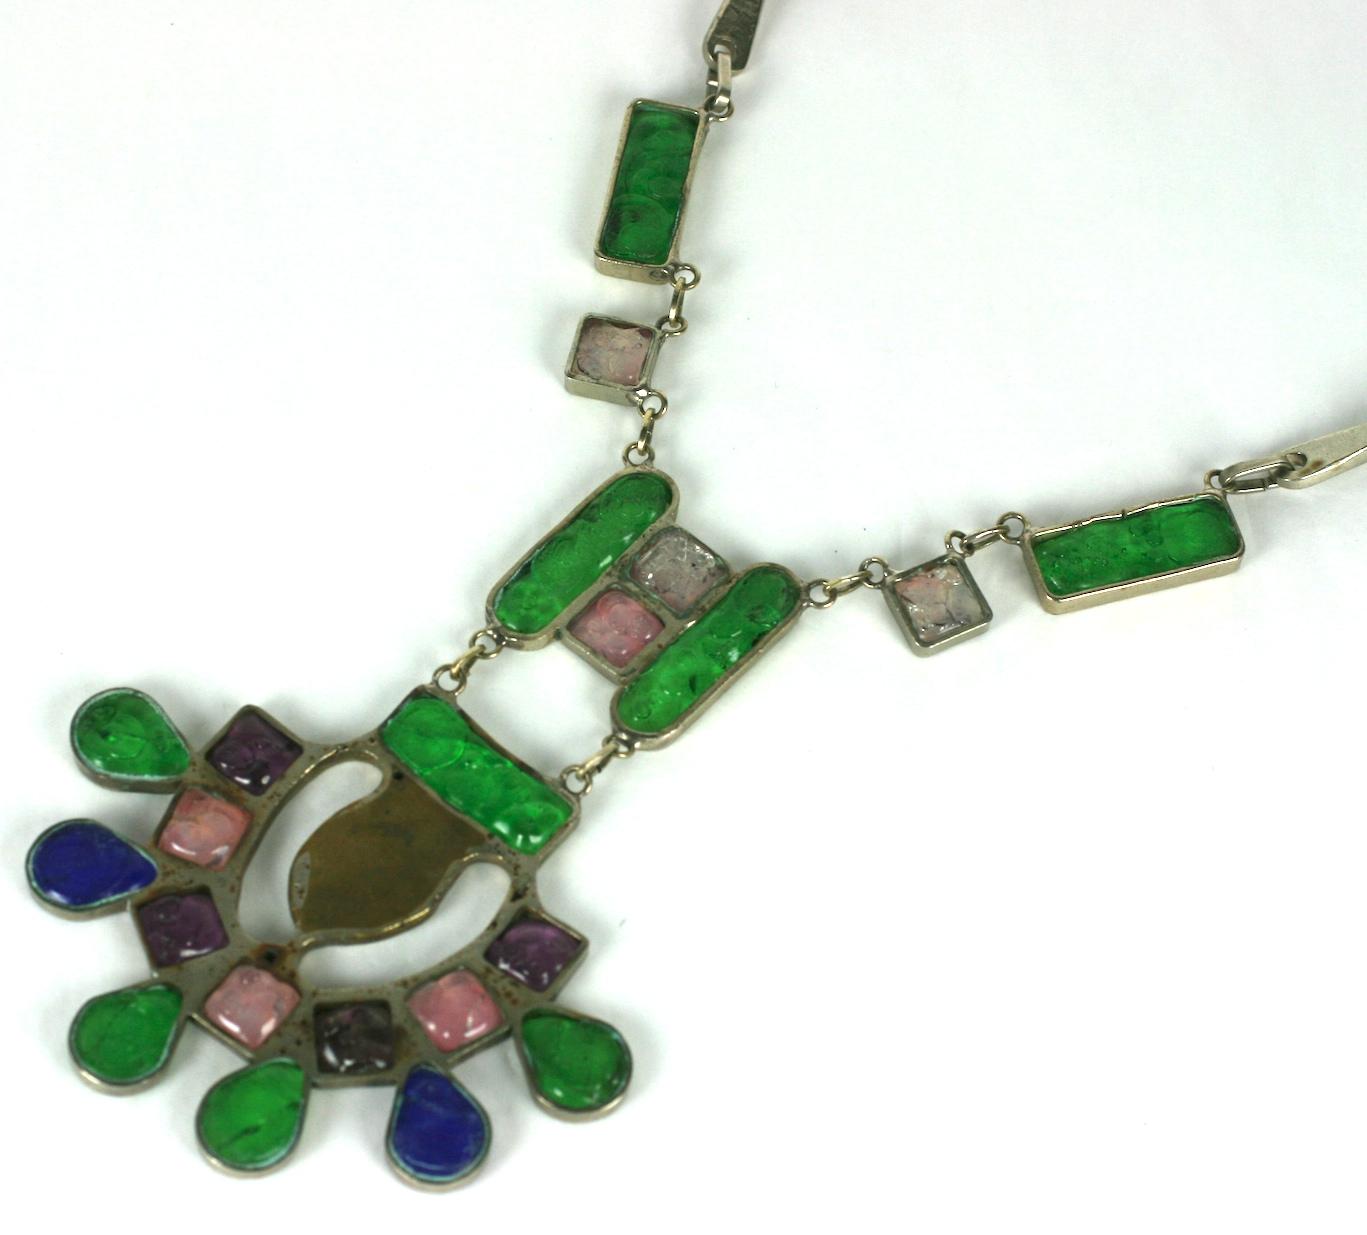 Artisanal Fused Glass Modernist Necklace In Excellent Condition For Sale In New York, NY